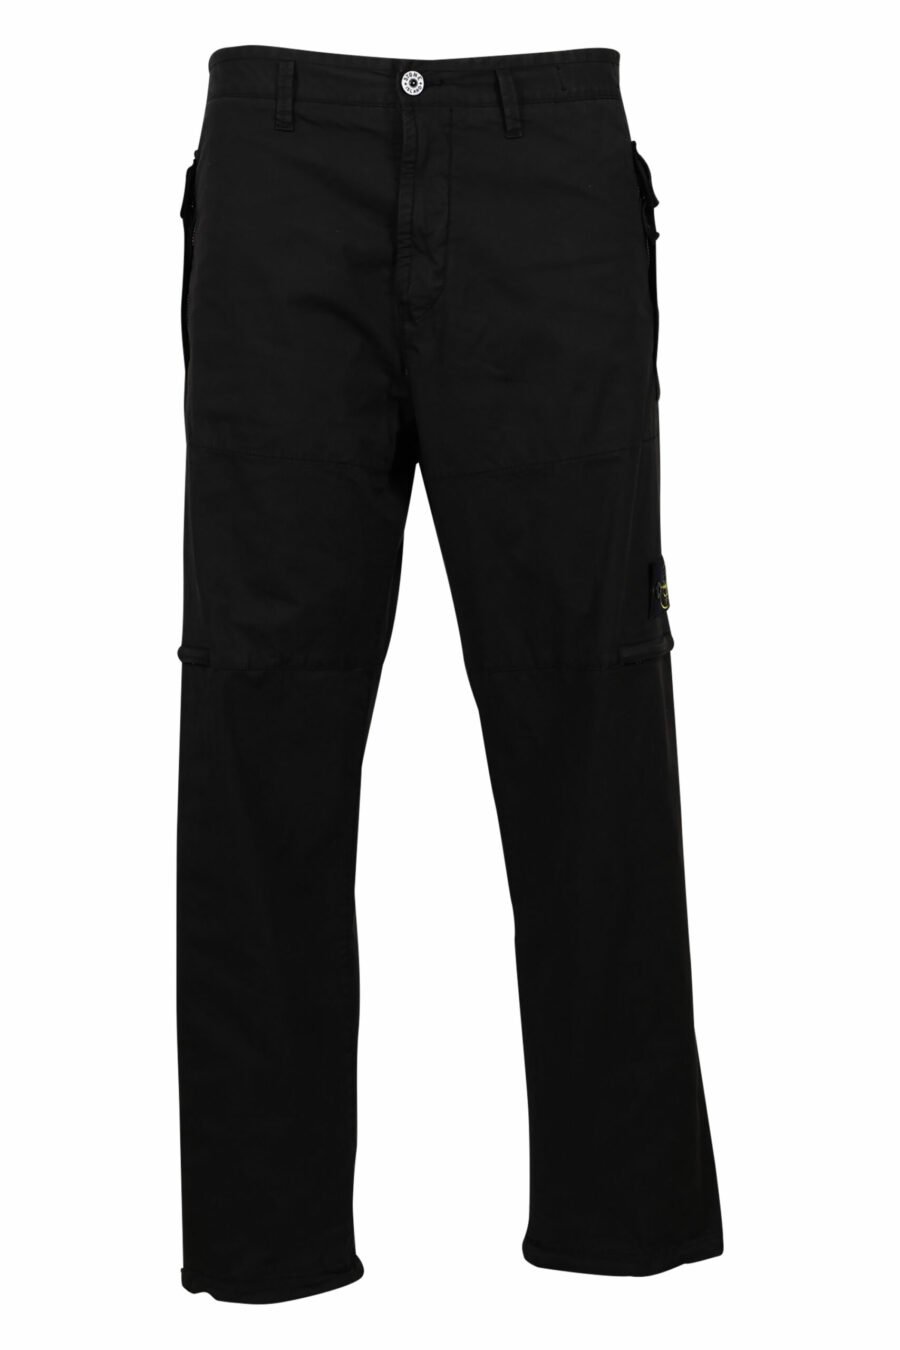 Black cargo trousers with pockets and logo patch - 8052572731846 scaled